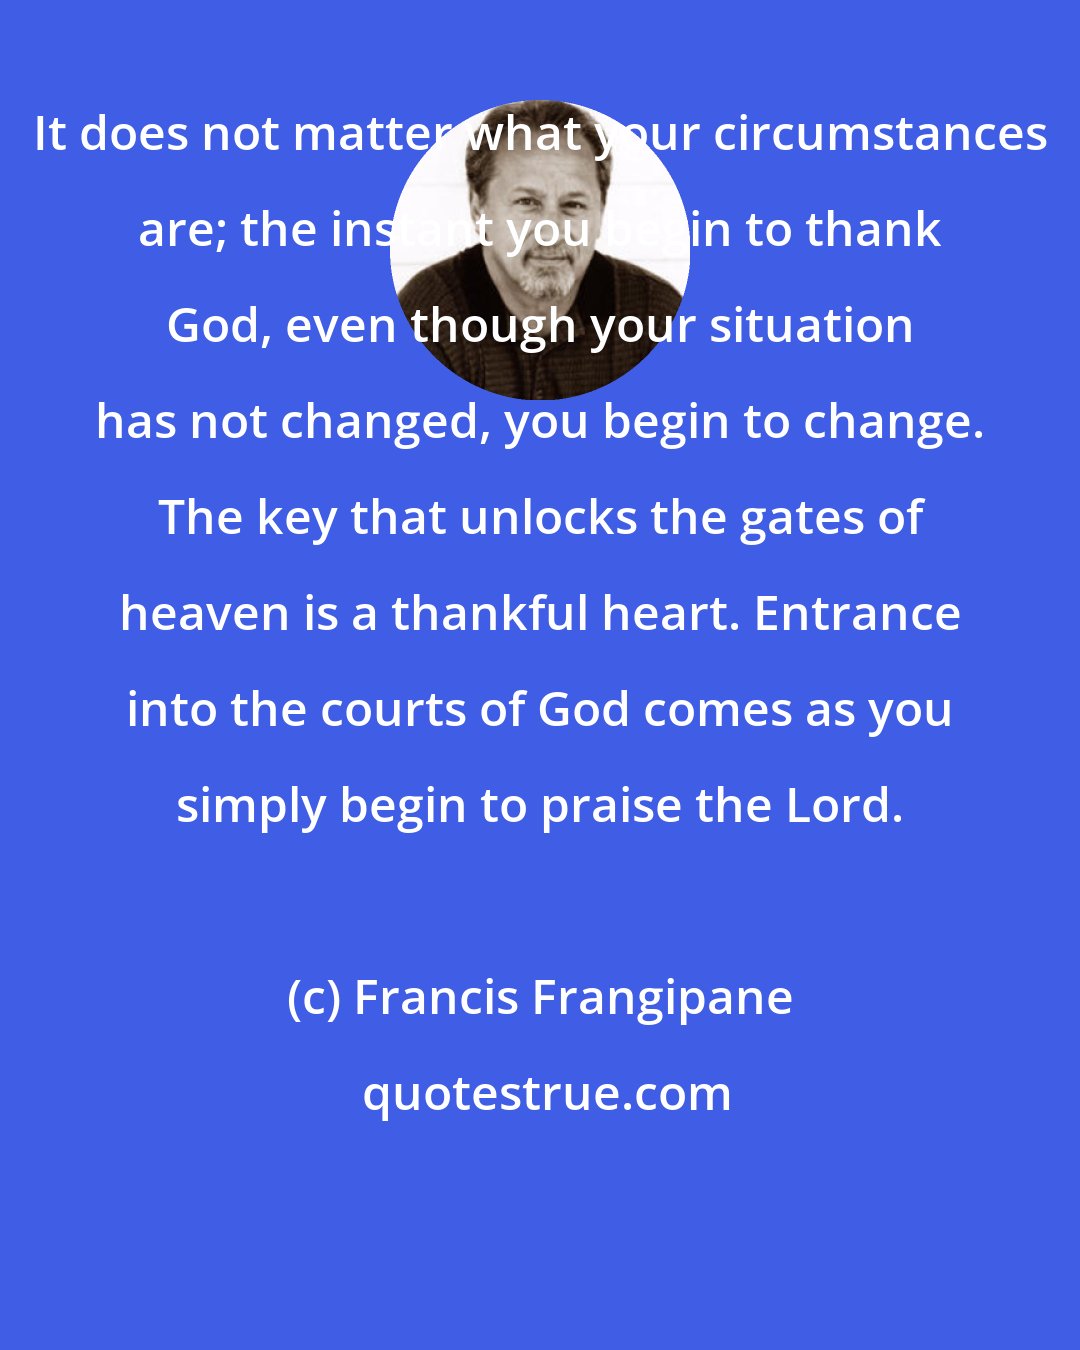 Francis Frangipane: It does not matter what your circumstances are; the instant you begin to thank God, even though your situation has not changed, you begin to change. The key that unlocks the gates of heaven is a thankful heart. Entrance into the courts of God comes as you simply begin to praise the Lord.